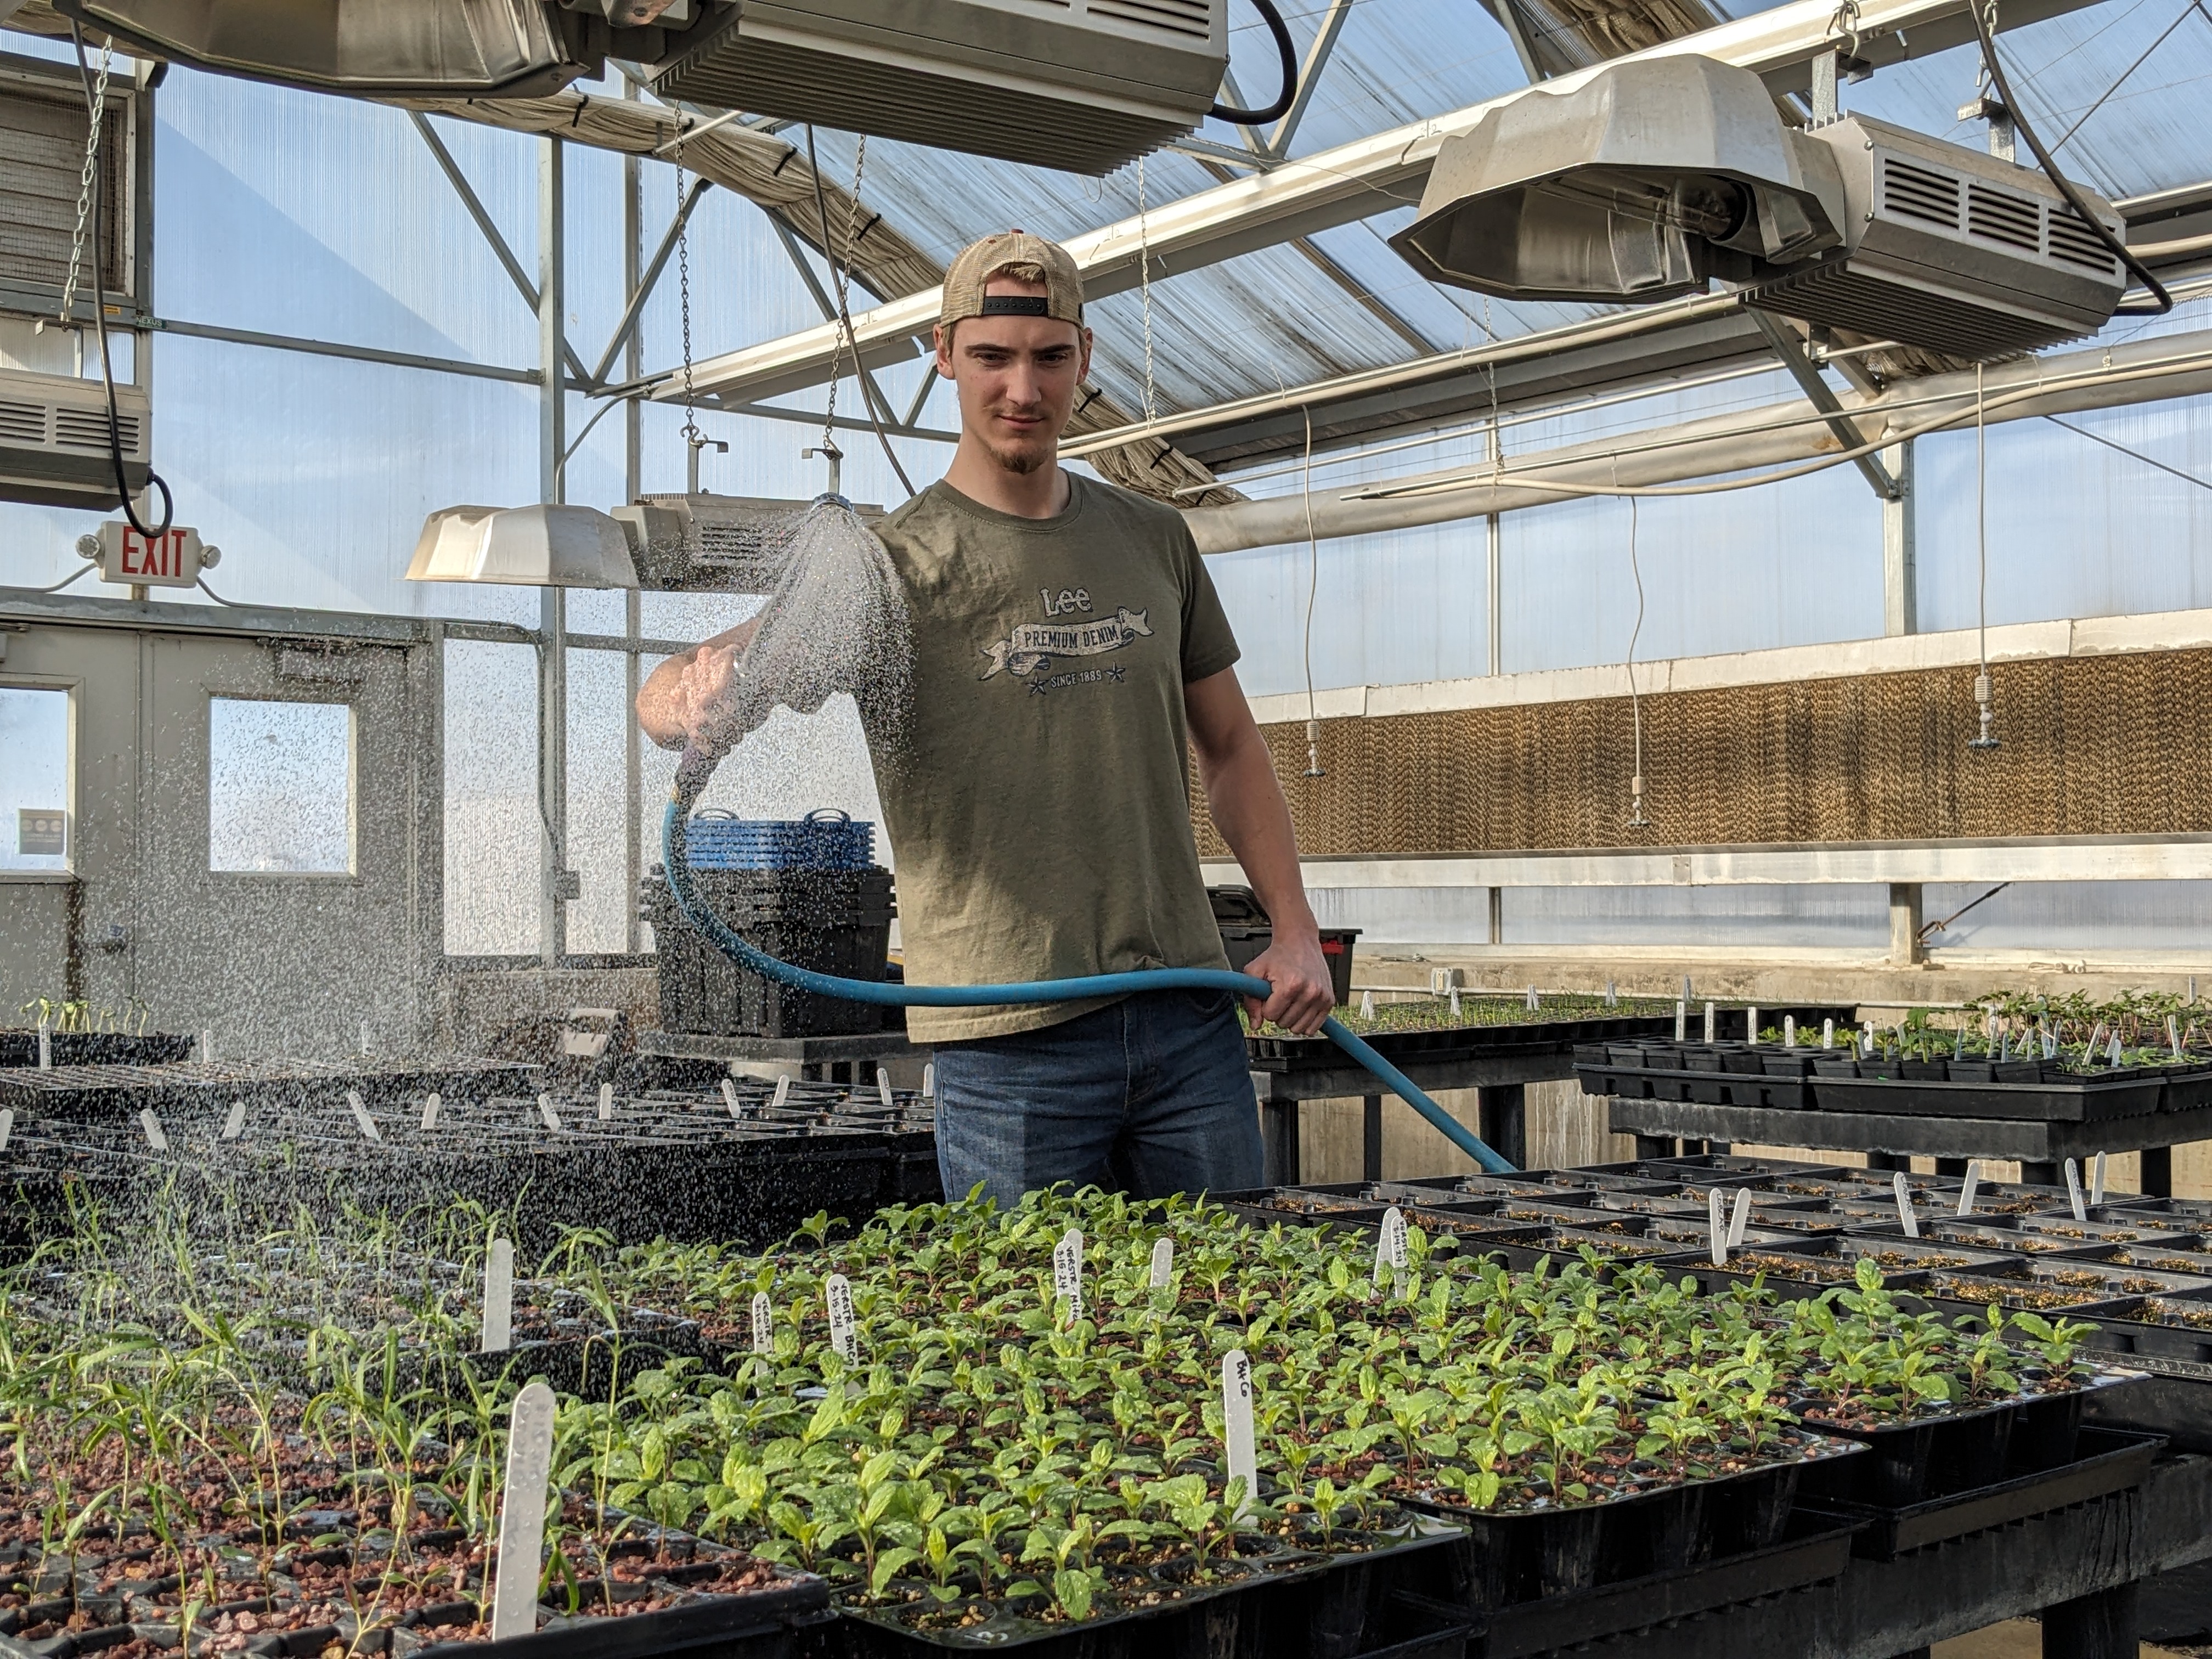 A person uses a watering wand to gently water flats of seedlings in a greenhouse